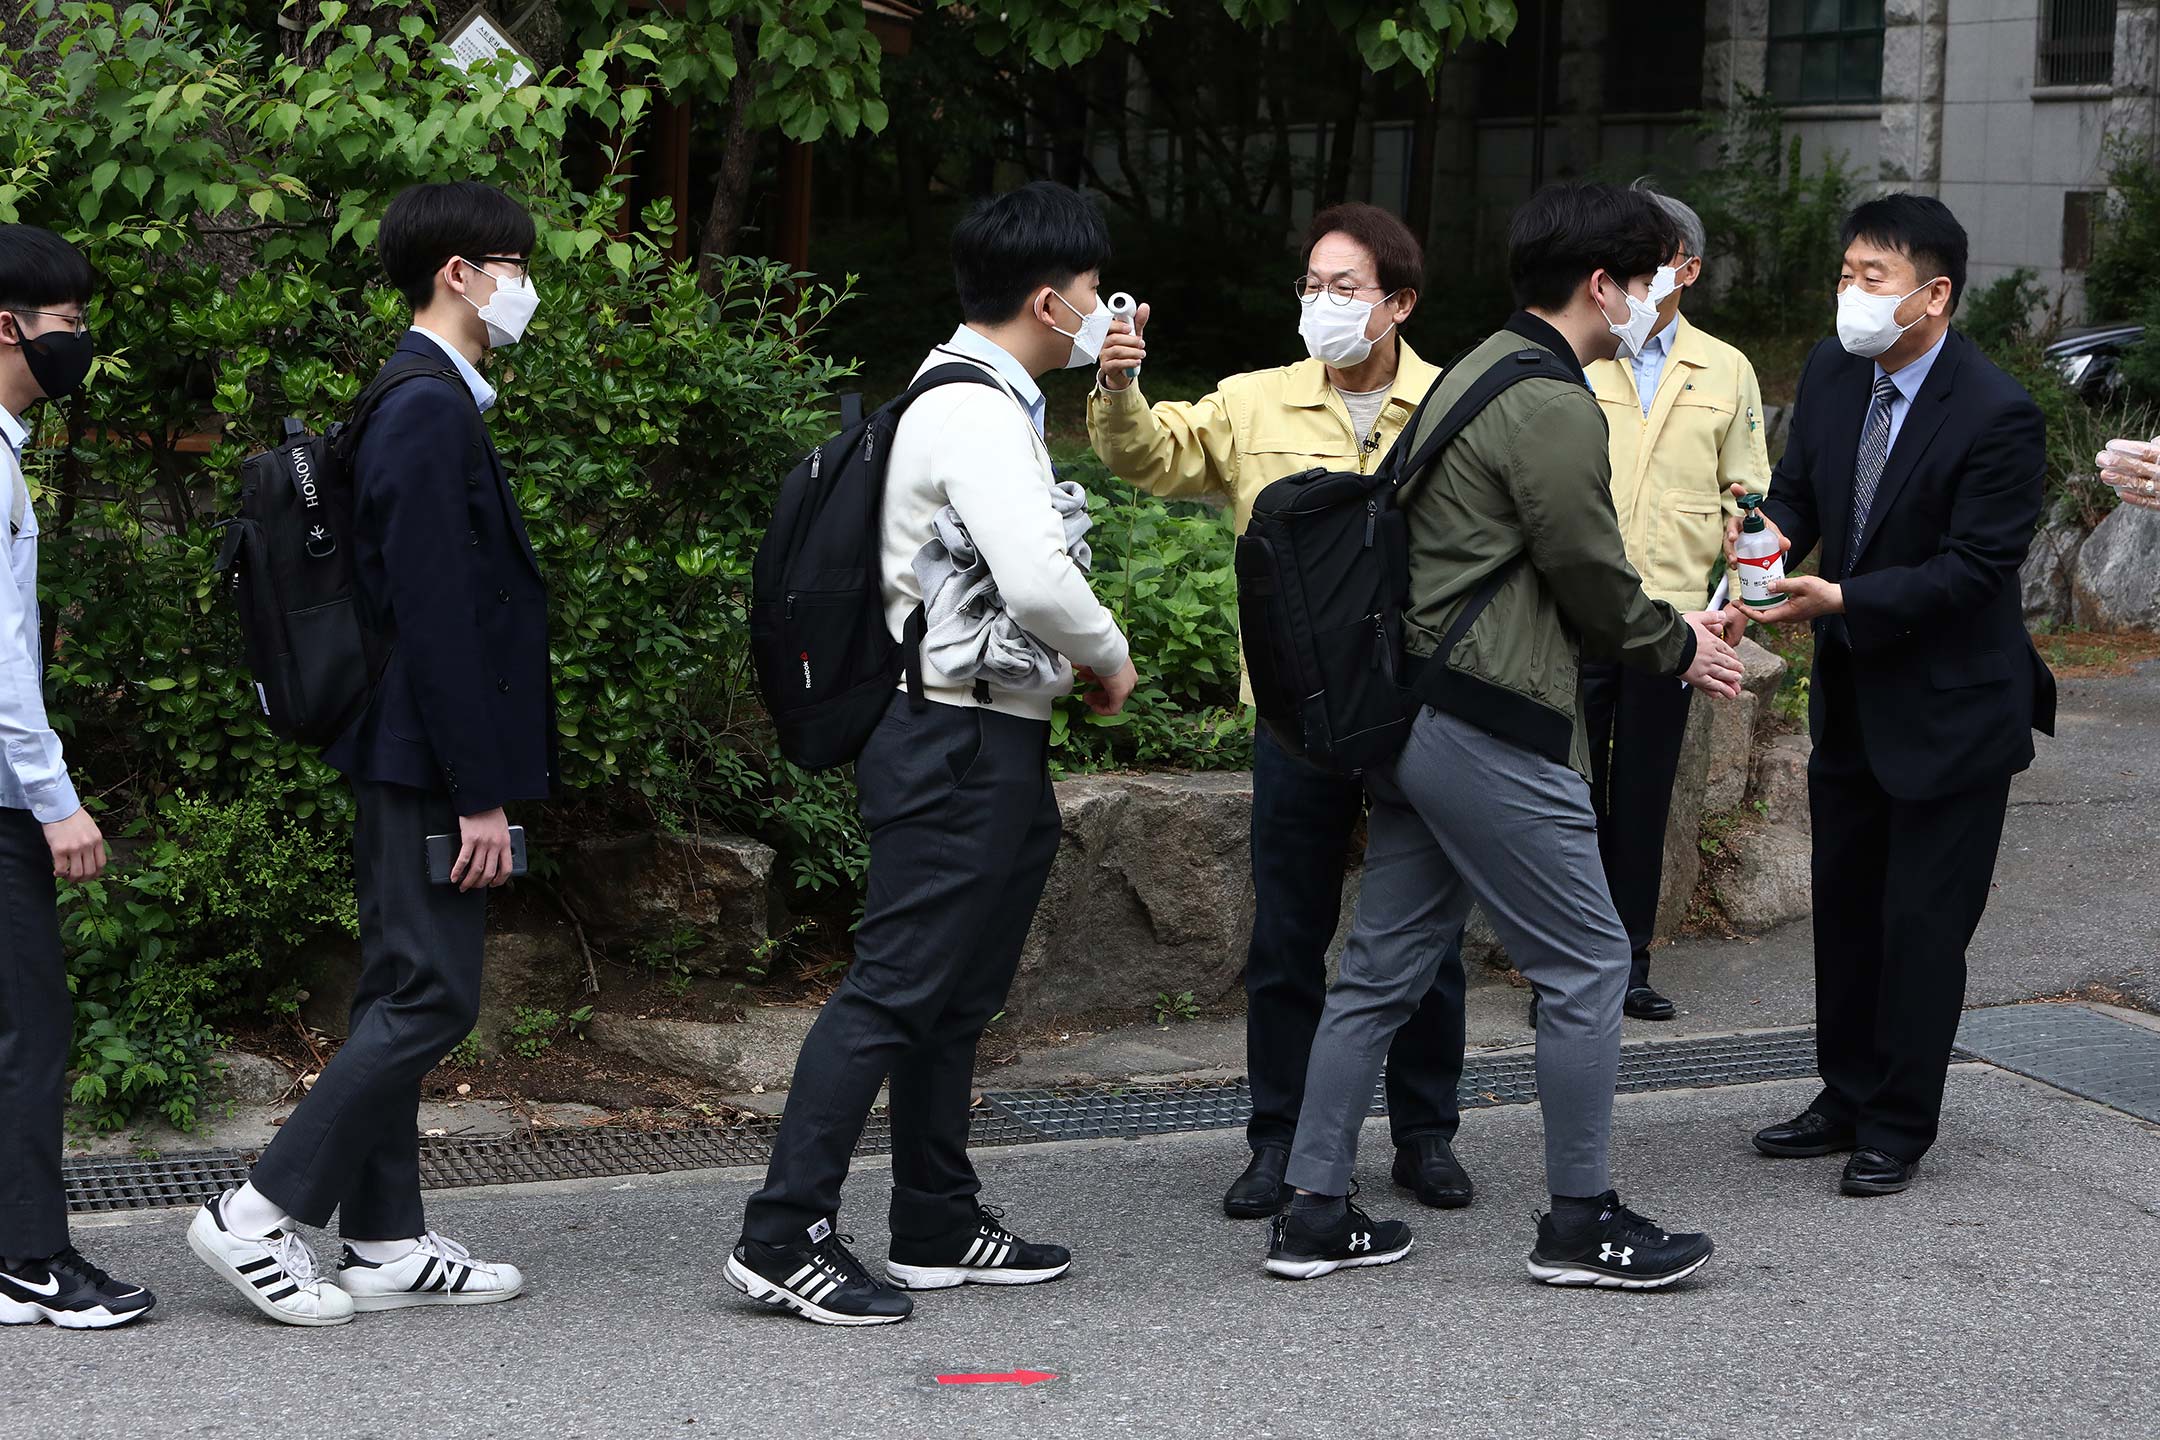 A line of students in South Korea, all wearing masks, get their temperatures taken before entering a reopened school